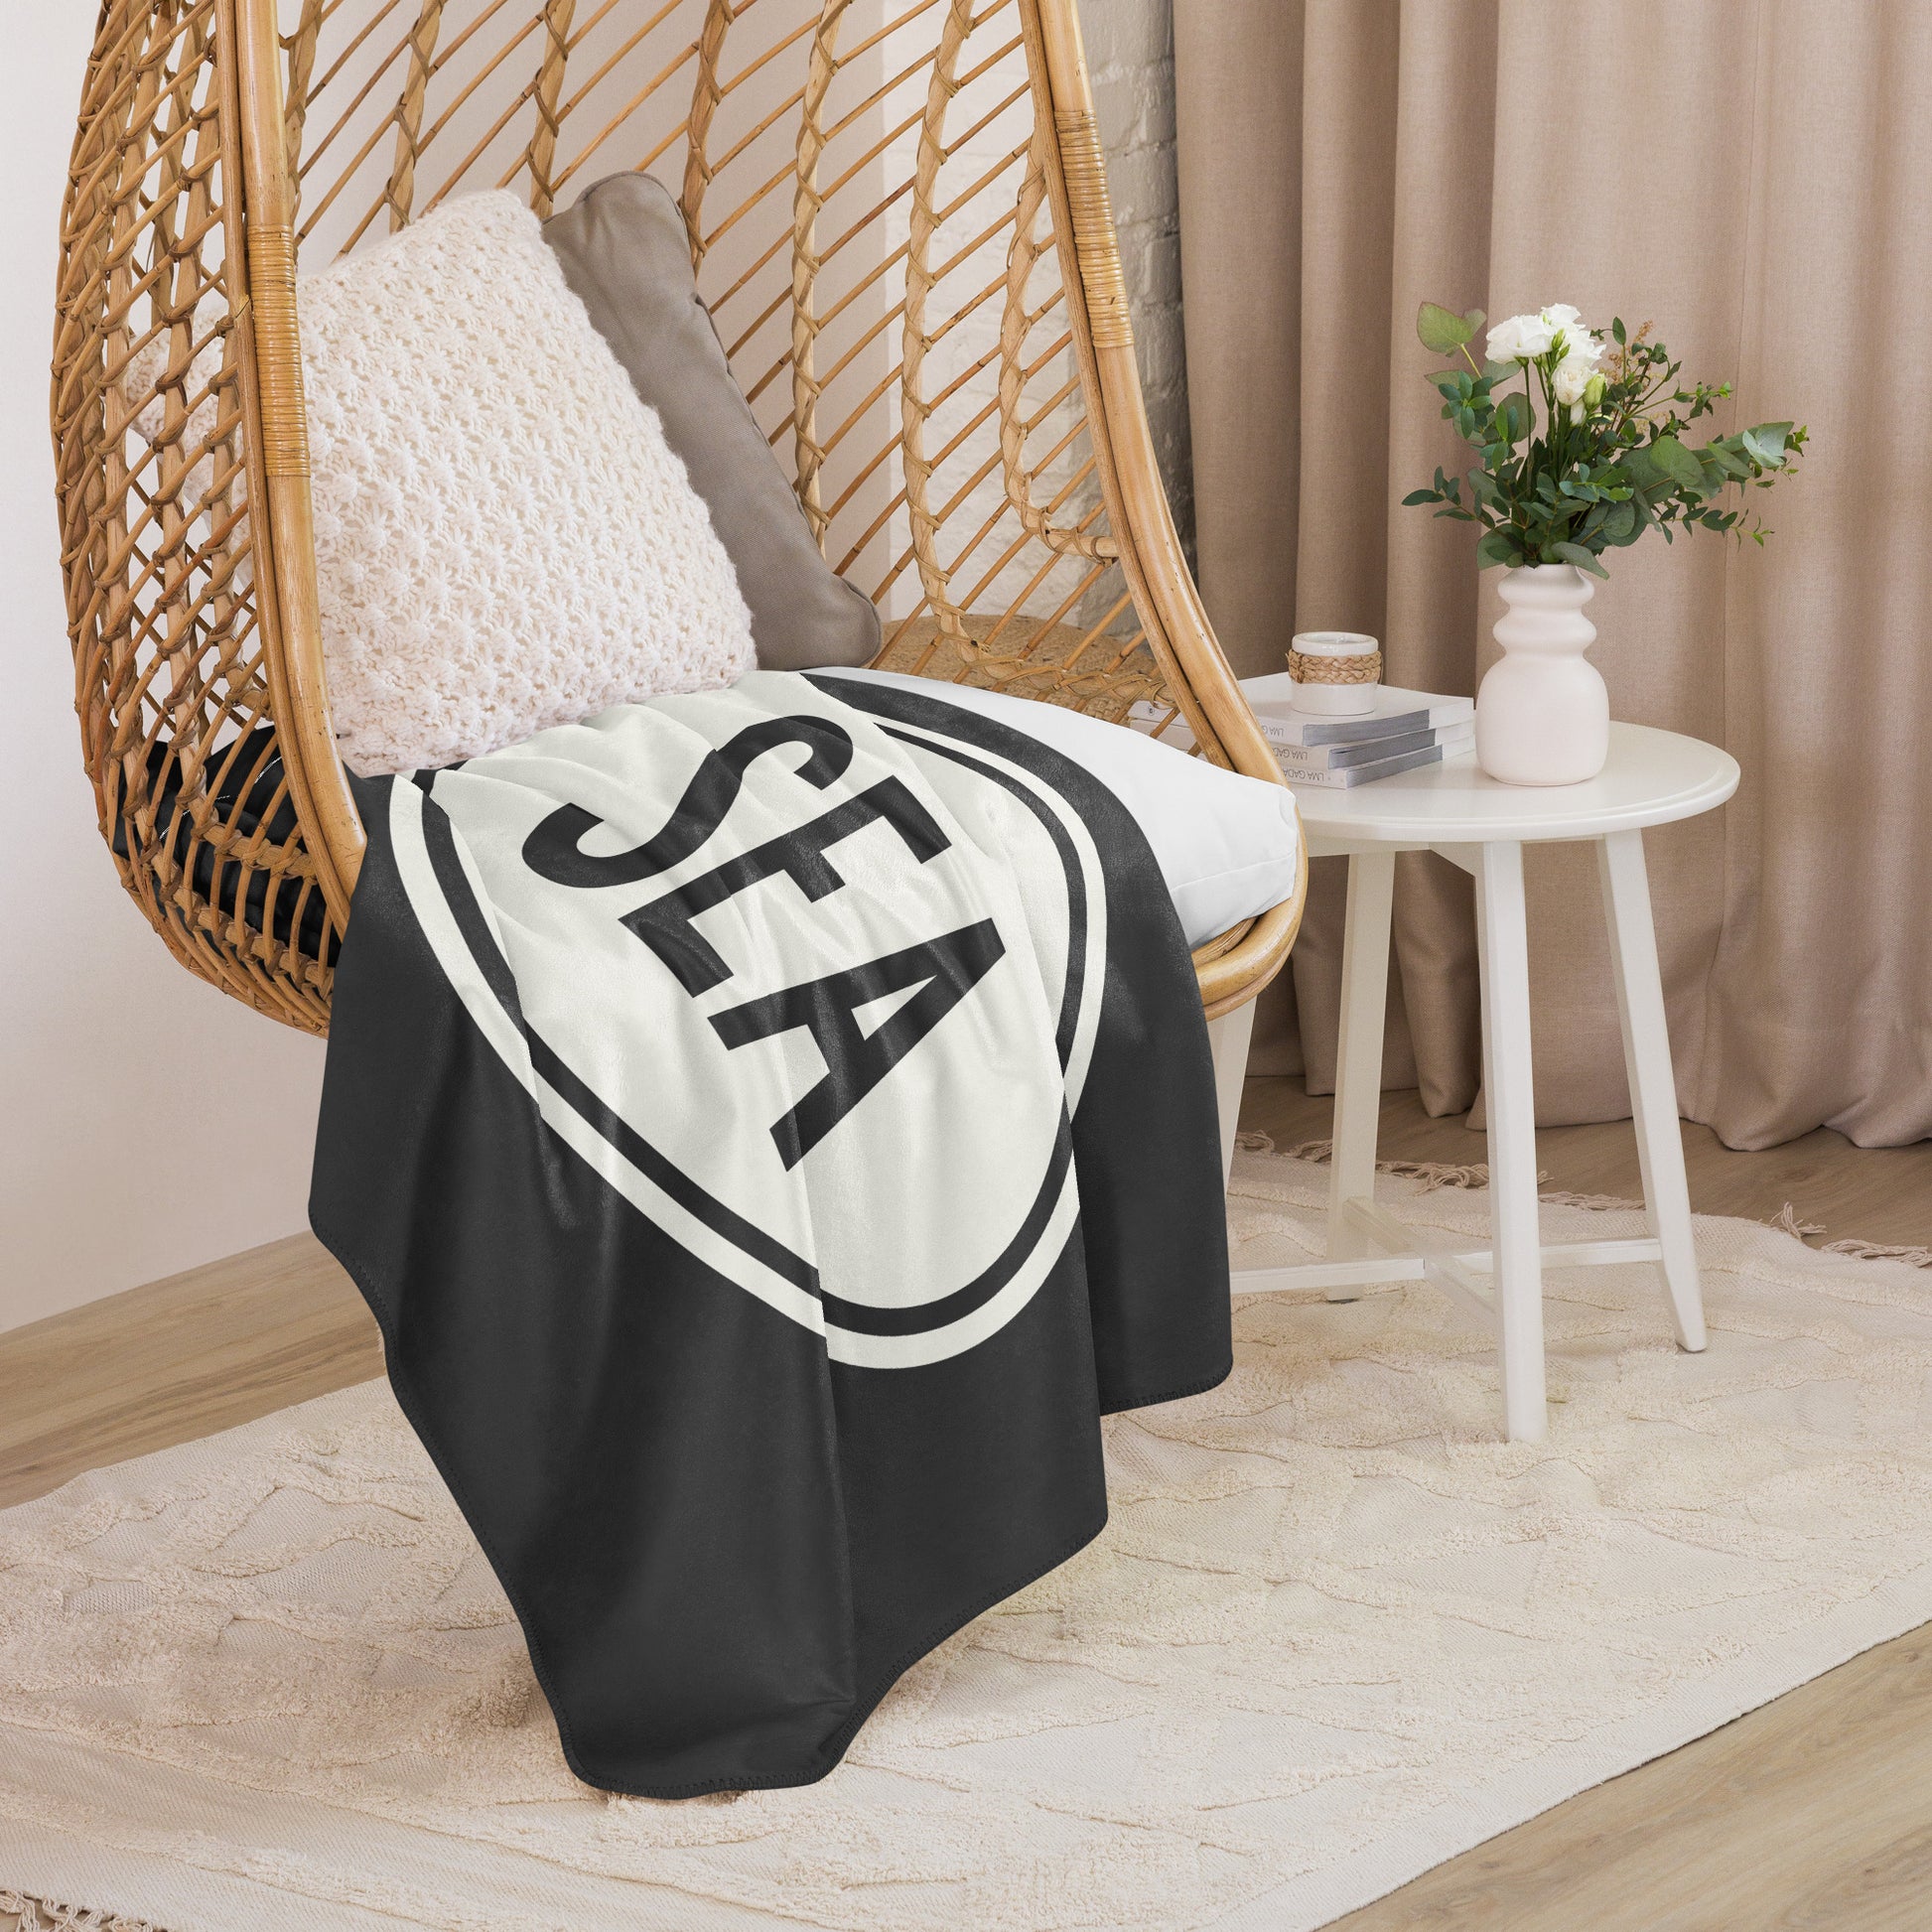 Unique Travel Gift Sherpa Blanket - White Oval • SEA Seattle • YHM Designs - Image 06